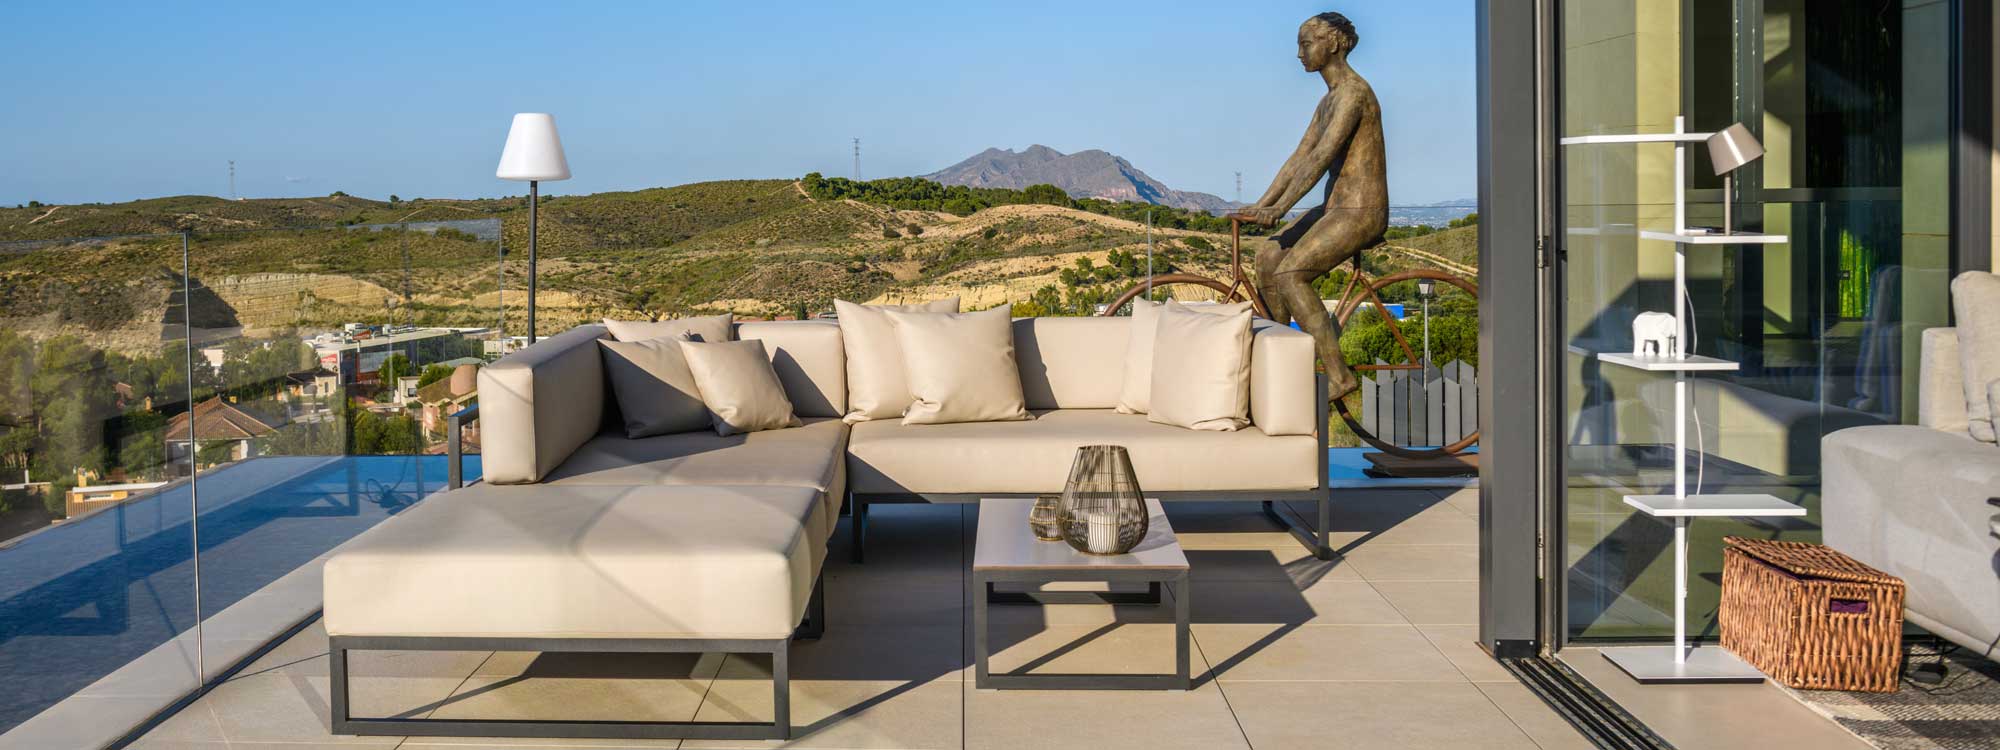 Image of Oiside Línea L shaped outdoor sofa and low table on terrace with scorched hills in the background